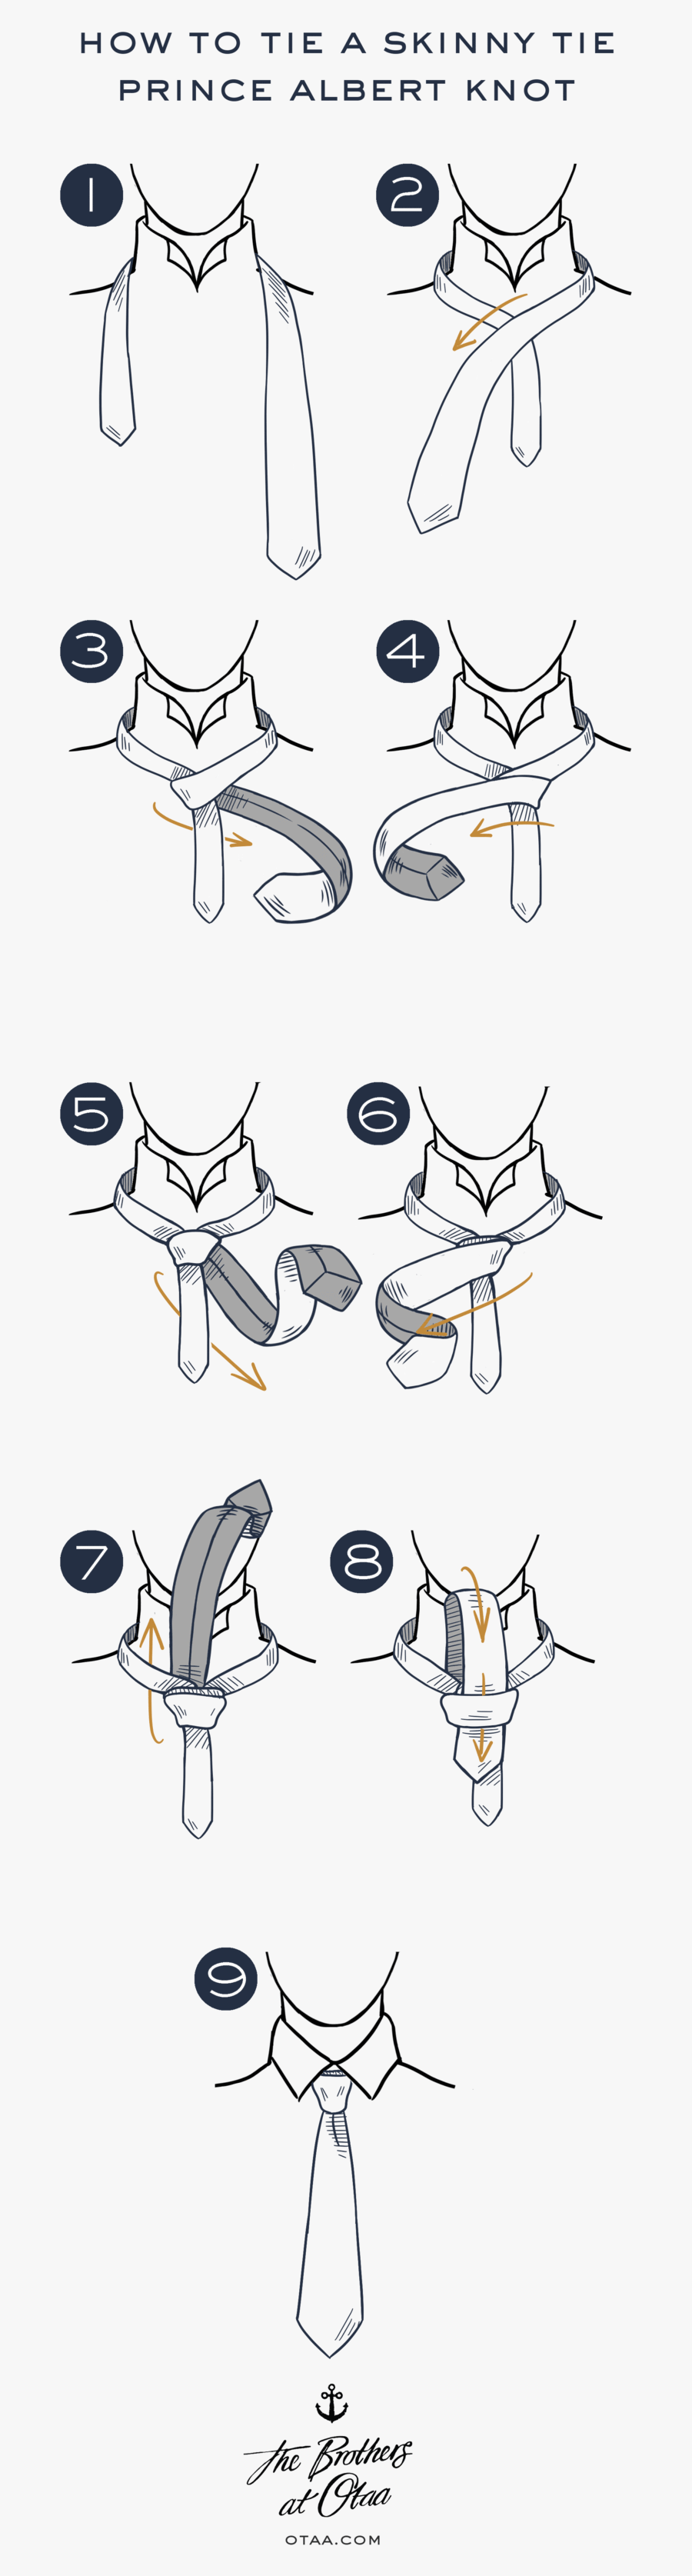 How To Tie A Skinny Tie - Biw To Tie A Bow Tie, Transparent Clipart